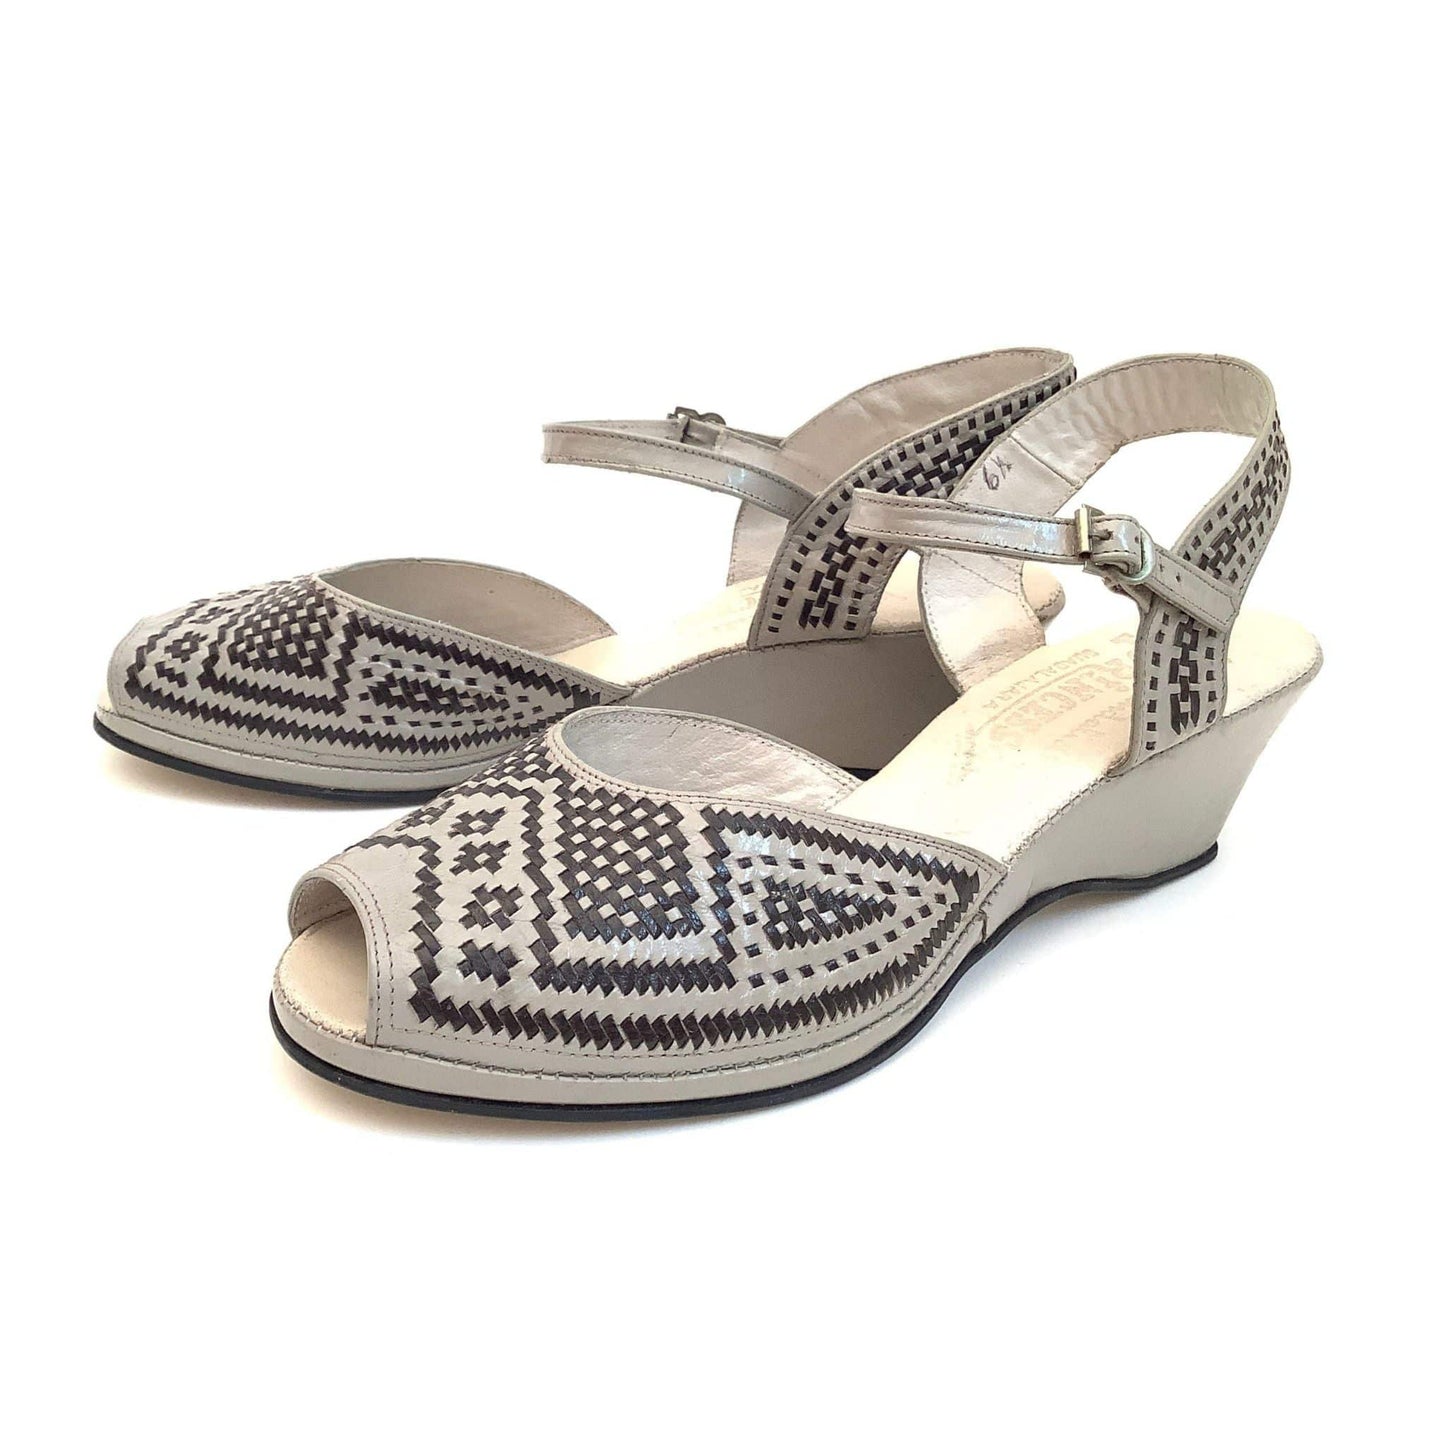 1930s Woven Leather Sandals 9 / Gray / Vintage 1930s